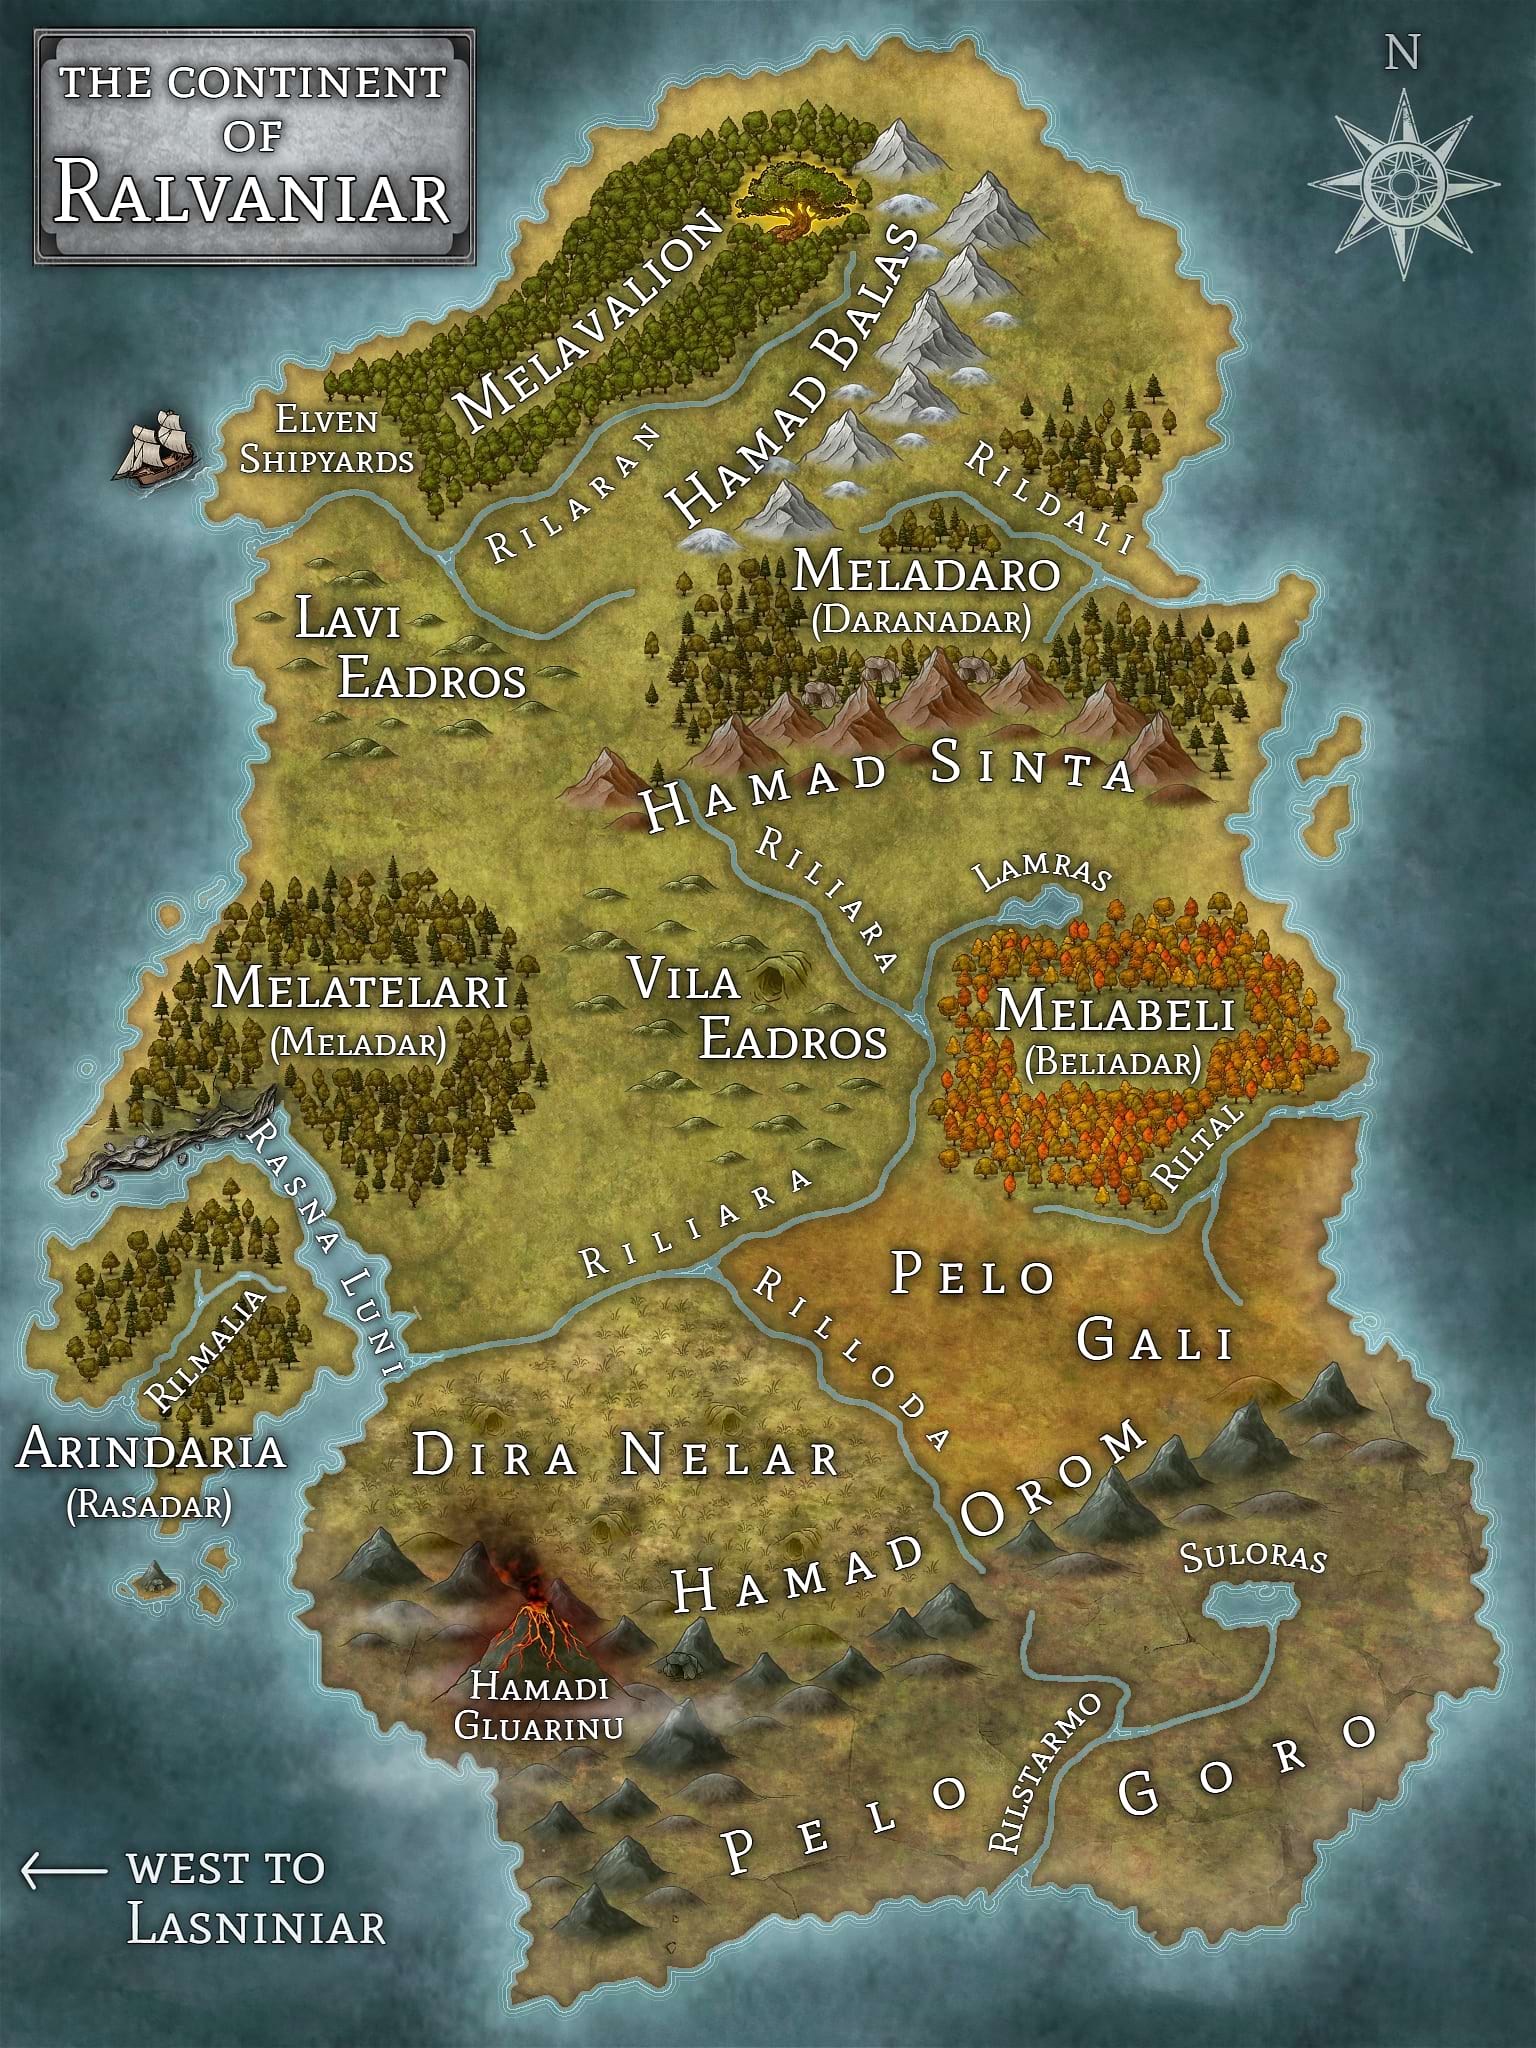 Map of Ralvaniar from the World of Lasniniar epic fantasy series